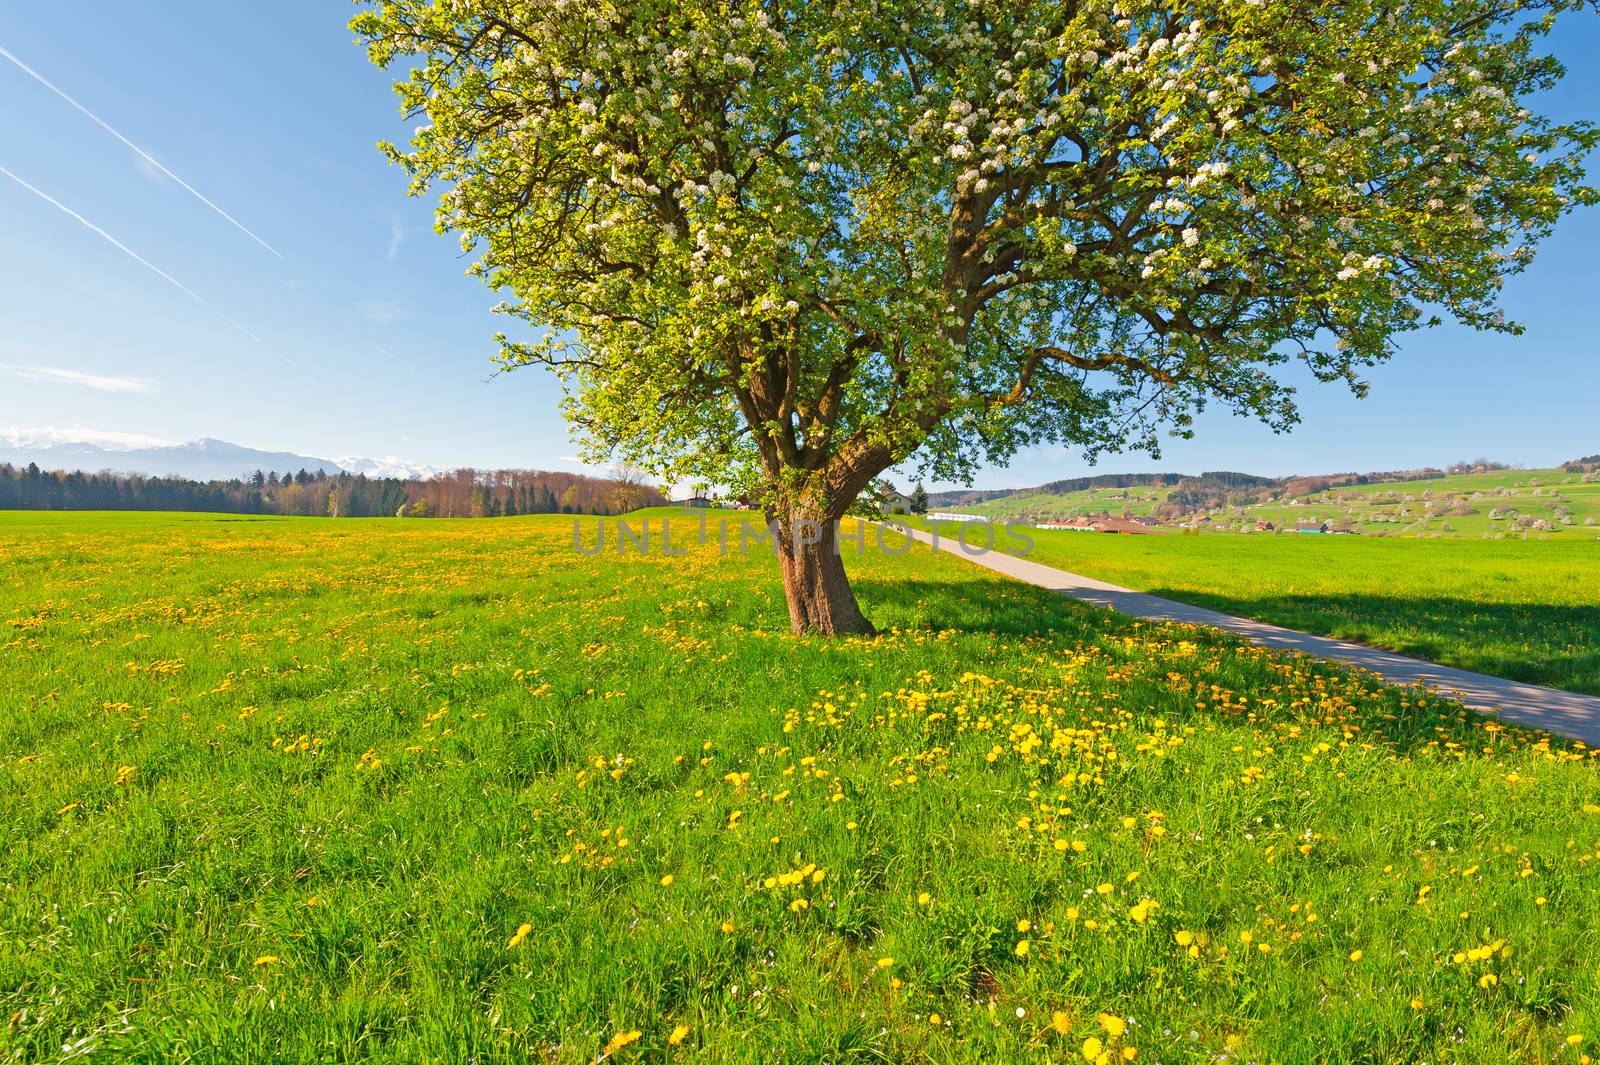 Solitary Flowering Tree Surrounded by Sloping Meadows in Switzerland on the Background of Snow-capped Alps